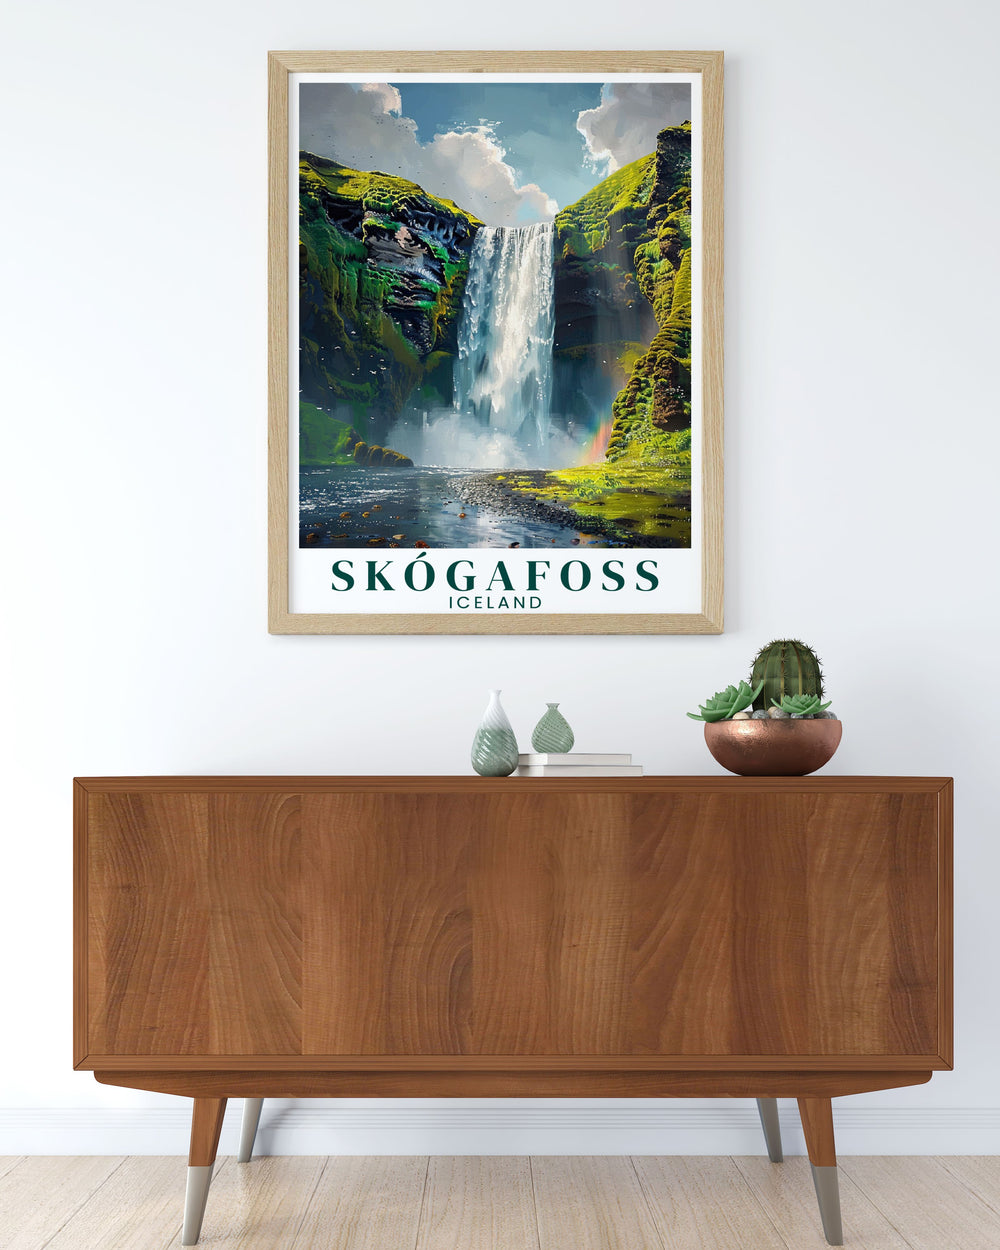 Beautiful Skogafoss waterfall wall art featuring vibrant colors and intricate details bringing the captivating Icelandic landscape into your living space ideal for nature and travel enthusiasts.